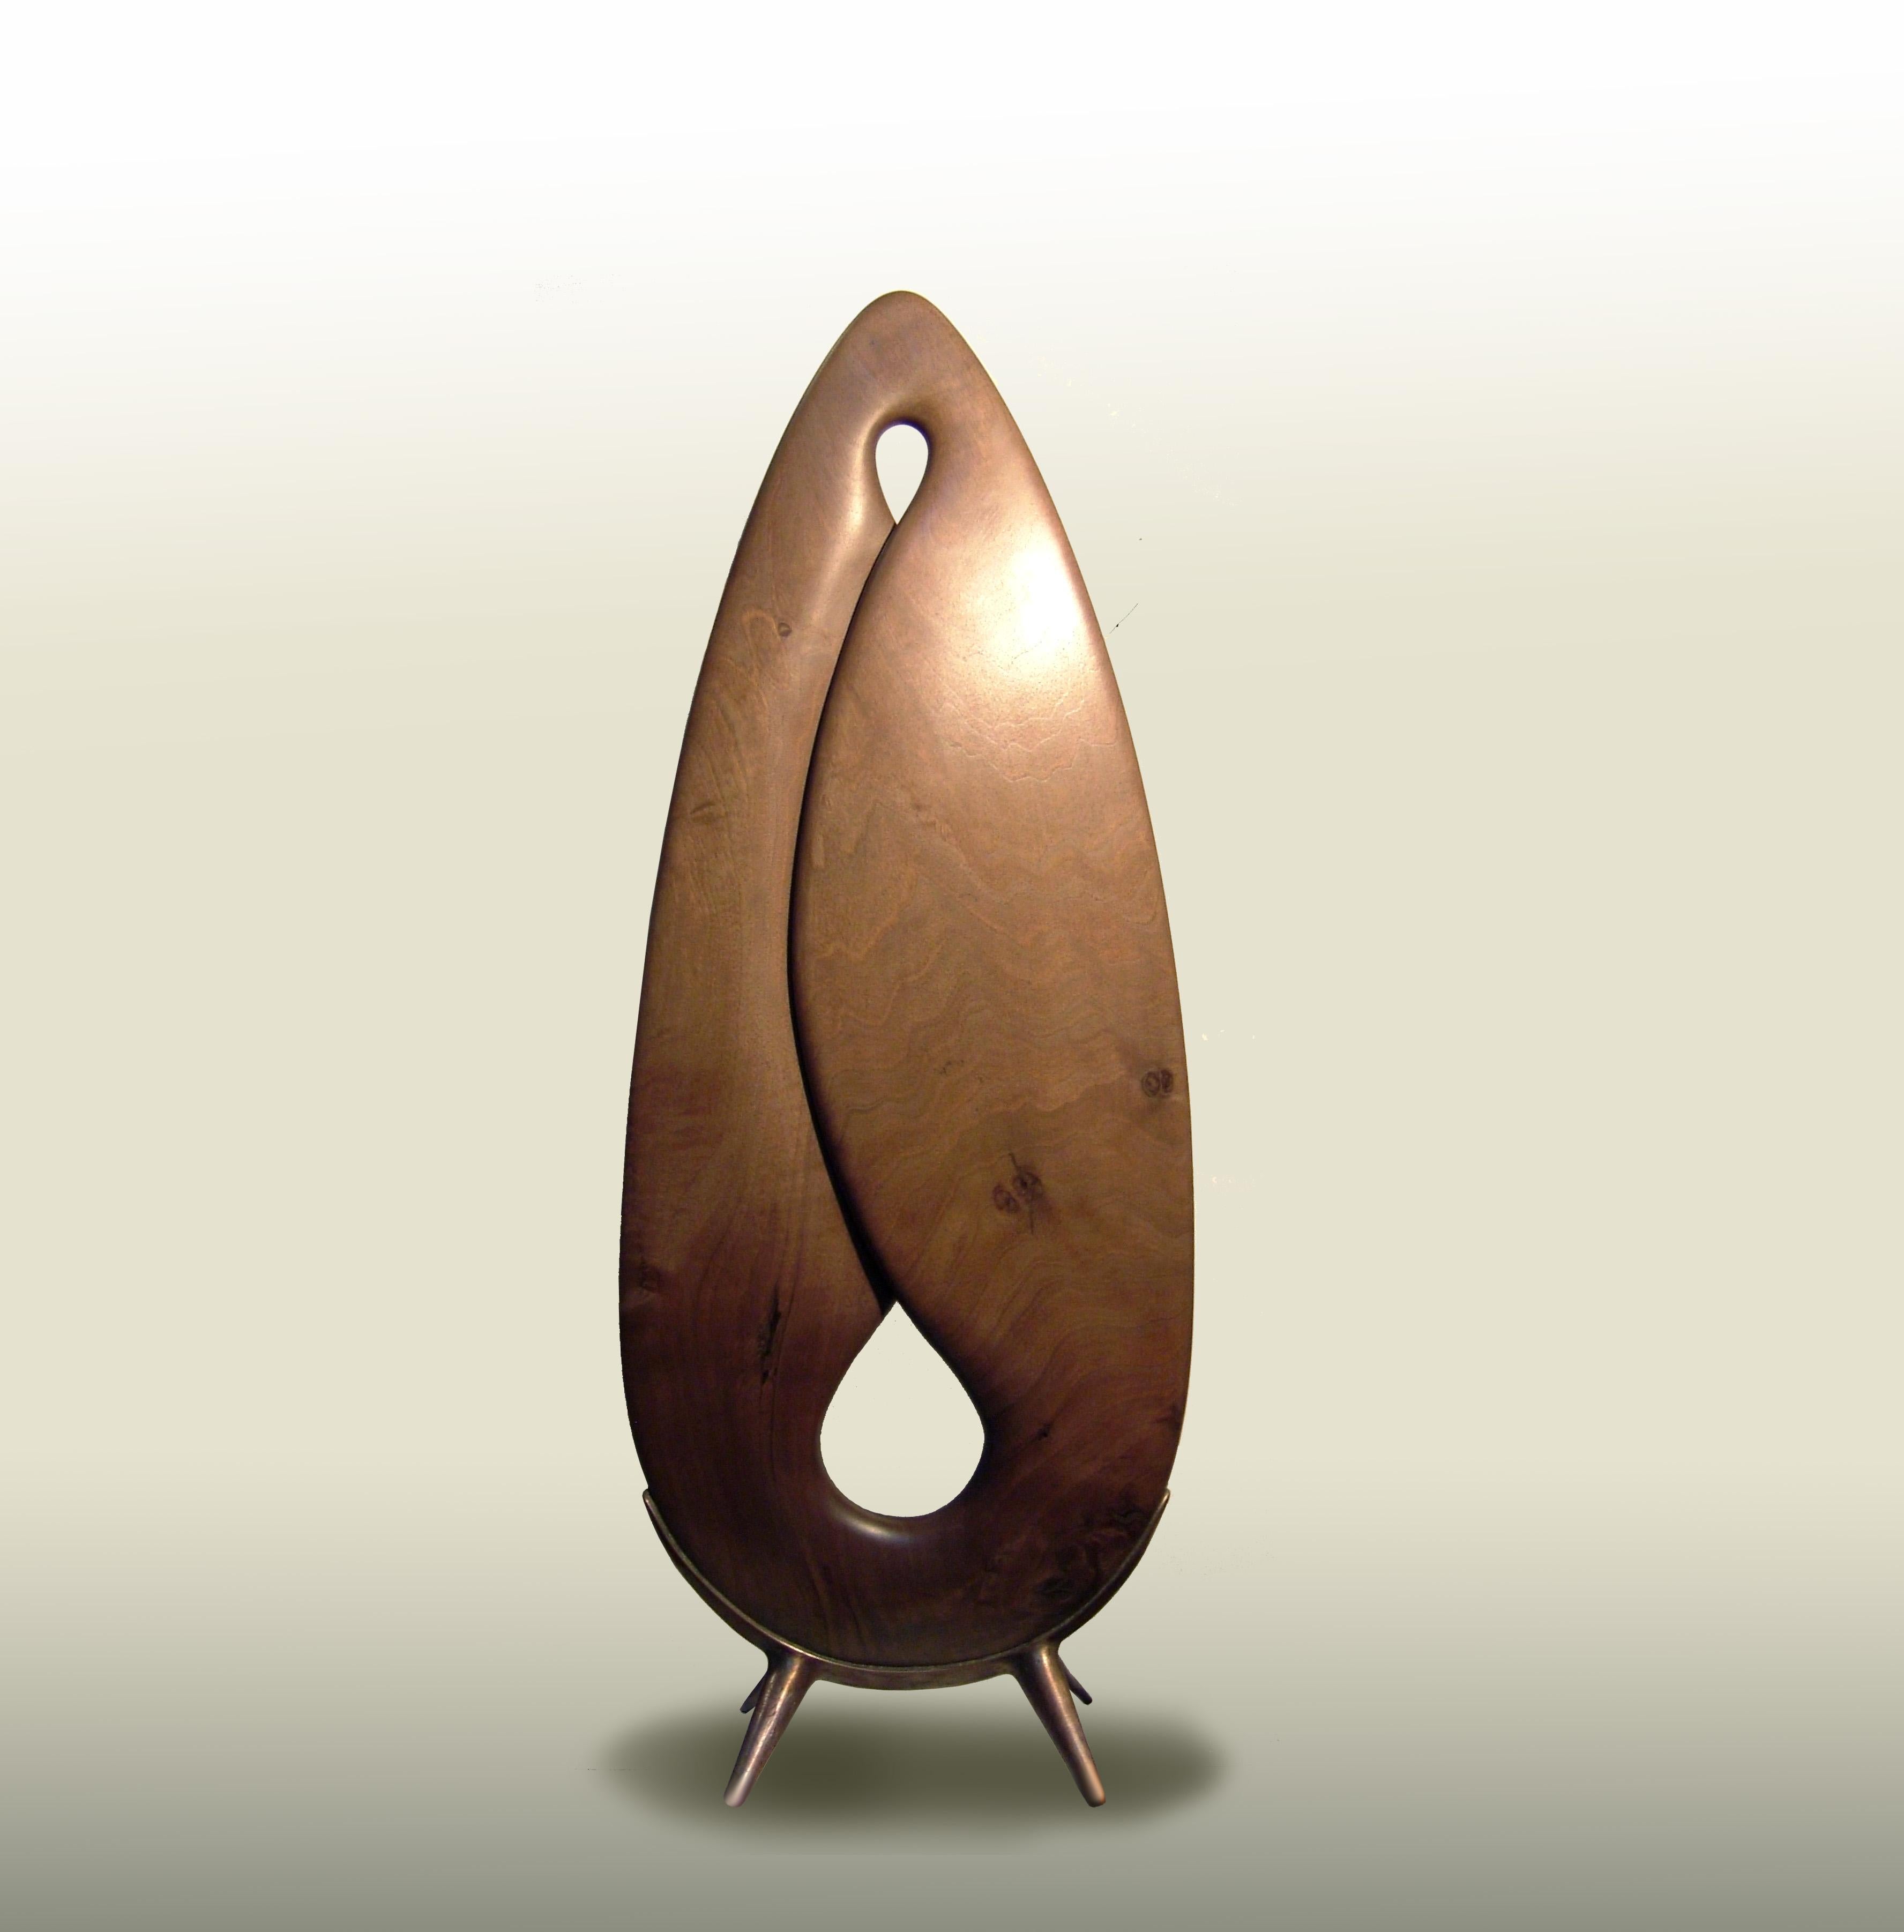 Sculpture LEAF is made of wallnut tree and combined with bronze.  An abstract form with organic aesthetic. Interior sculpture, that may looks your place fancy and original. 
One of a kind  art piece.